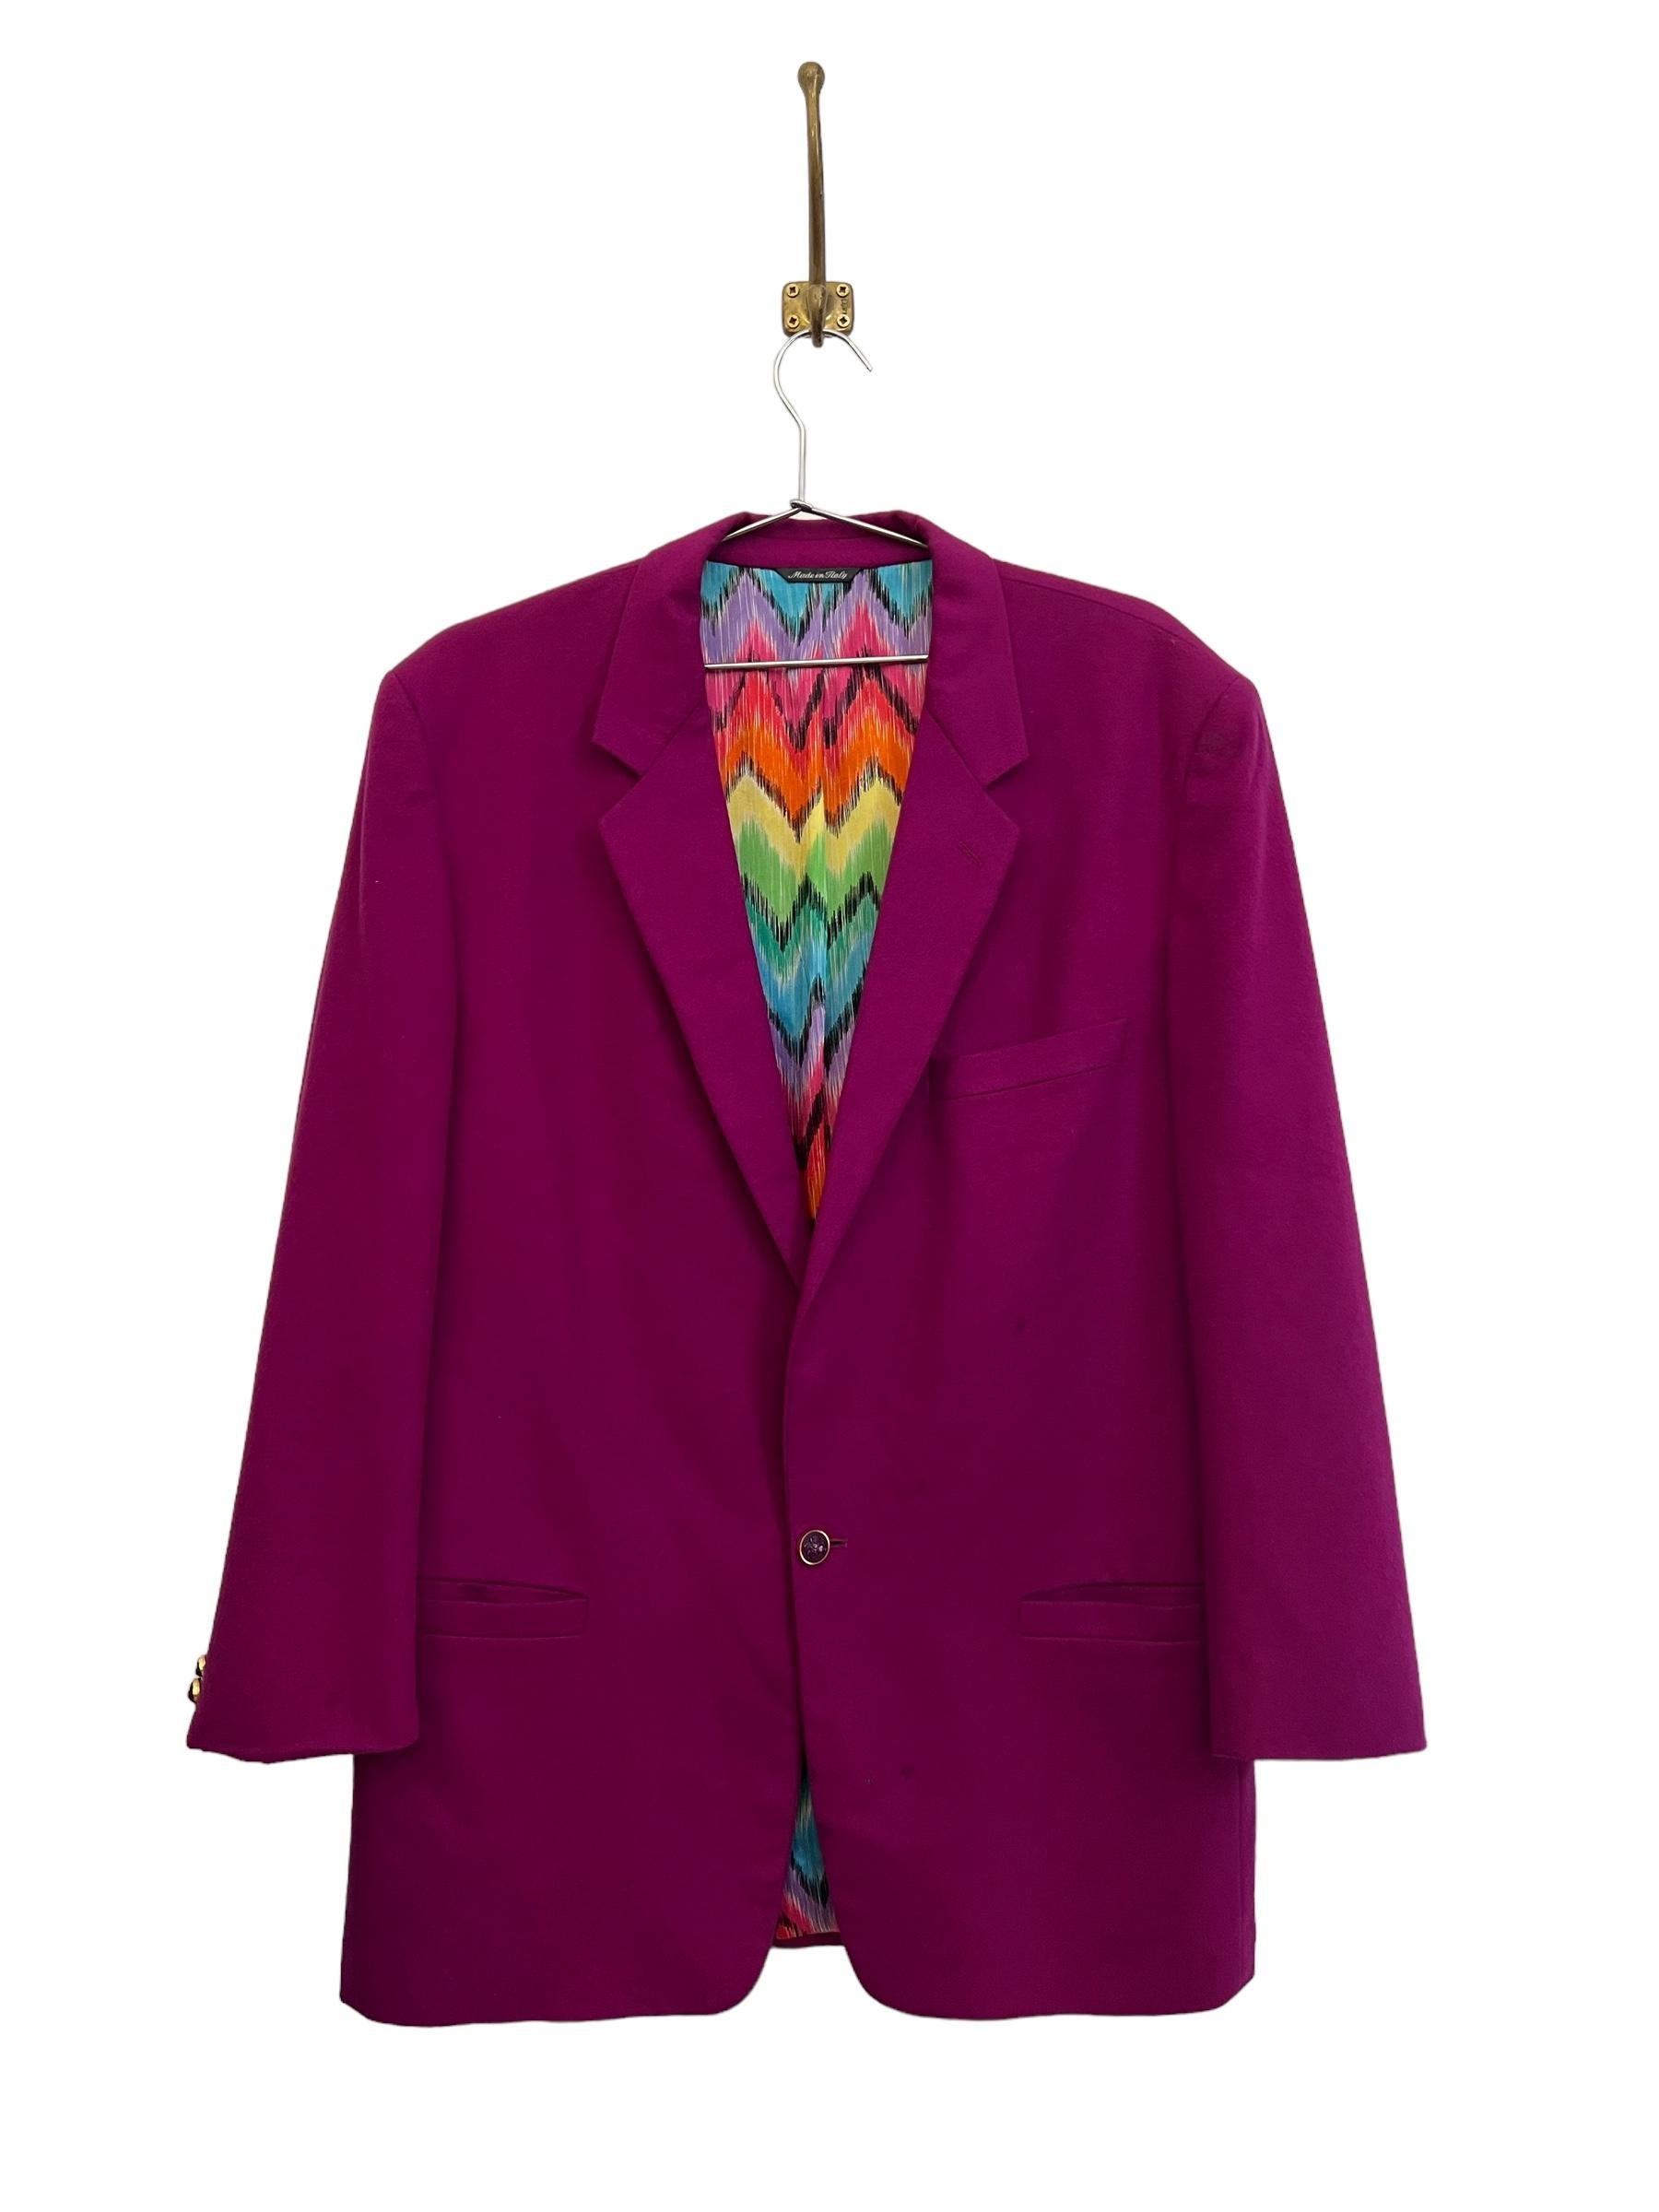 Loud Vintage early 1990's Versace 'VERSUS' label Blazer, in a deep Magenta shade of cashmere and wool blended material featuring a Bold rainbow satin zig-zag interior lining.  

Features:  
65% Wool - 35% Cashmere
Silk Lining
Buttons down front 
Hip